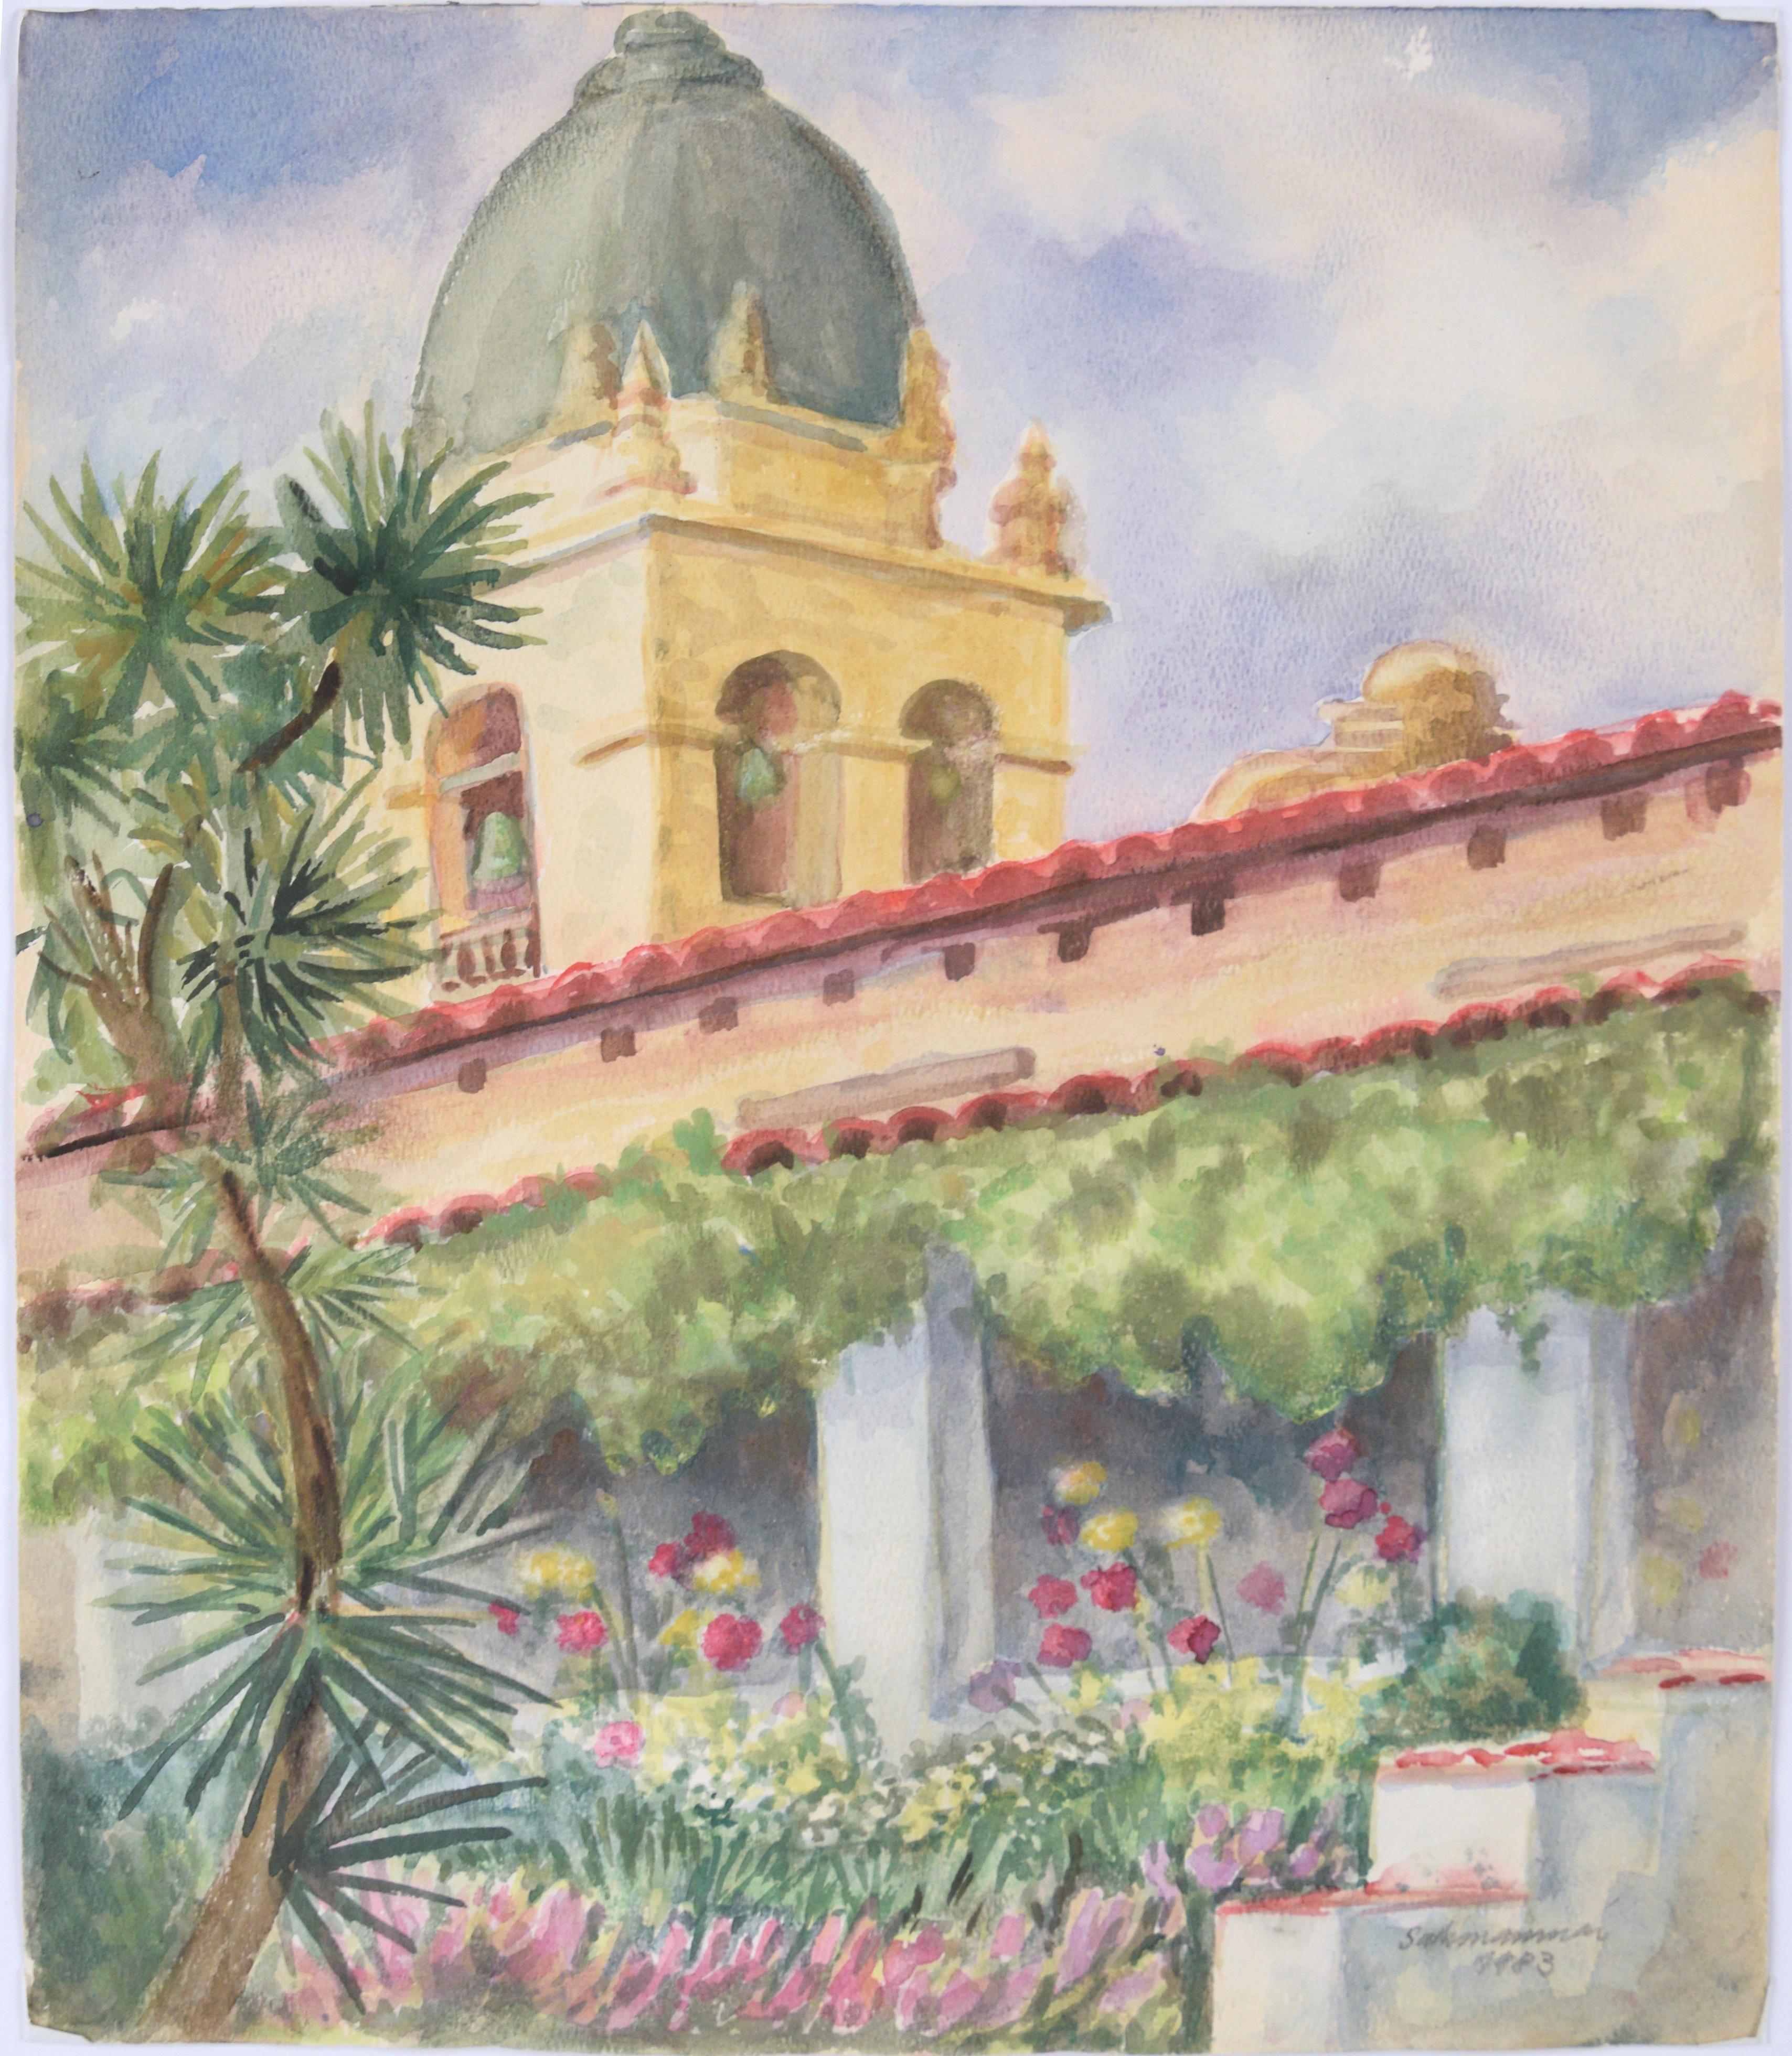 Carmel Mission in Early Spring - Original Watercolor Painting 1983

A vantage point from the backside of Camel Mission's cupola, this watercolor is brightly painted with spring flowers and framed by a palm and billowing cumulous clouds behind.